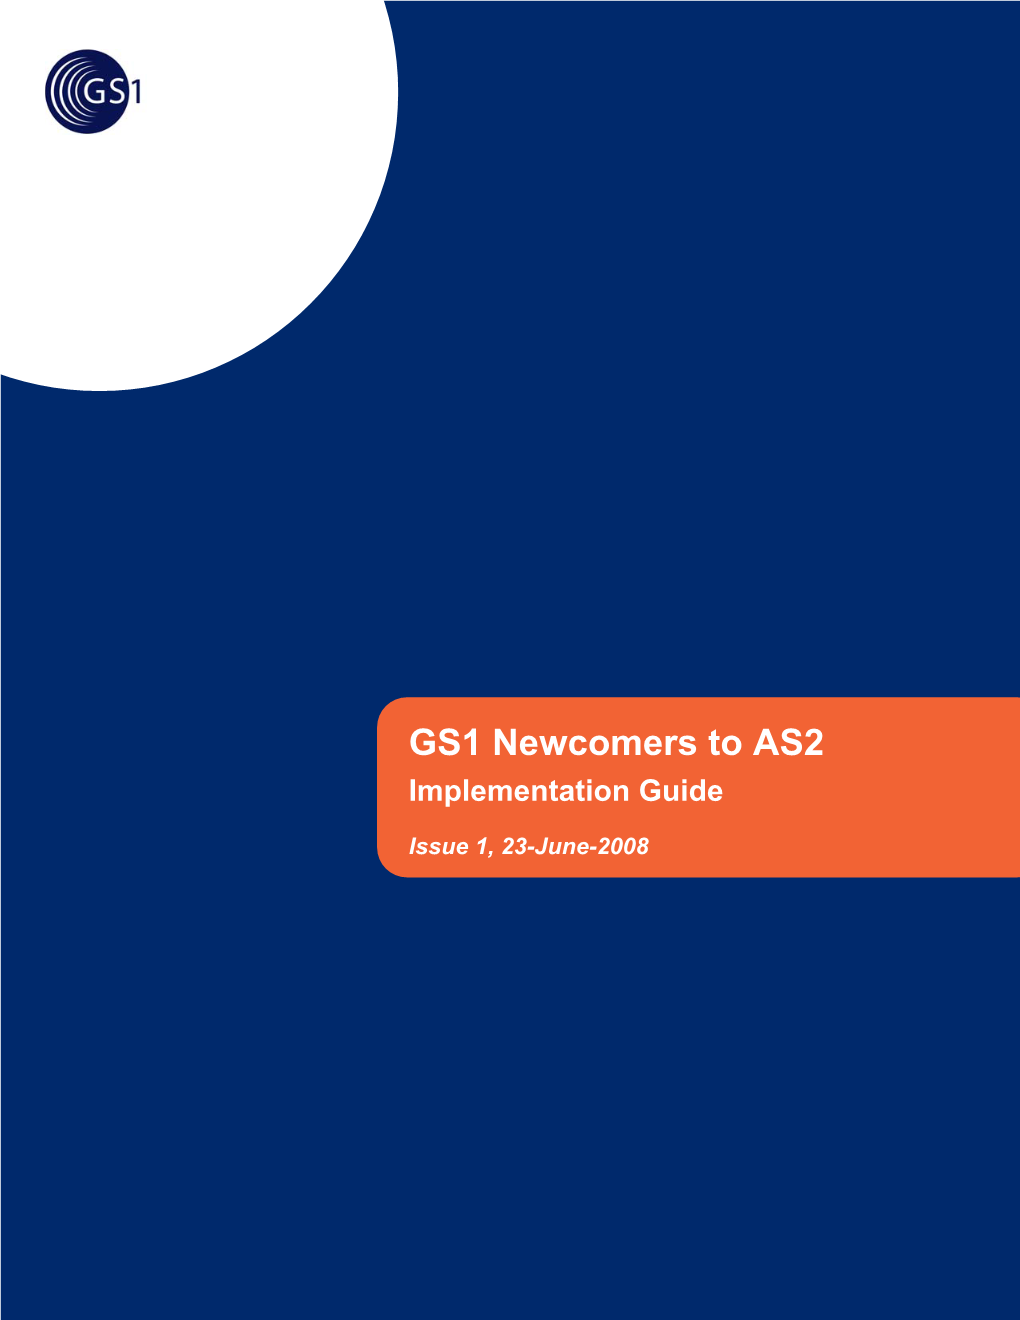 GS1 Newcomers to AS2 Implementation Guide